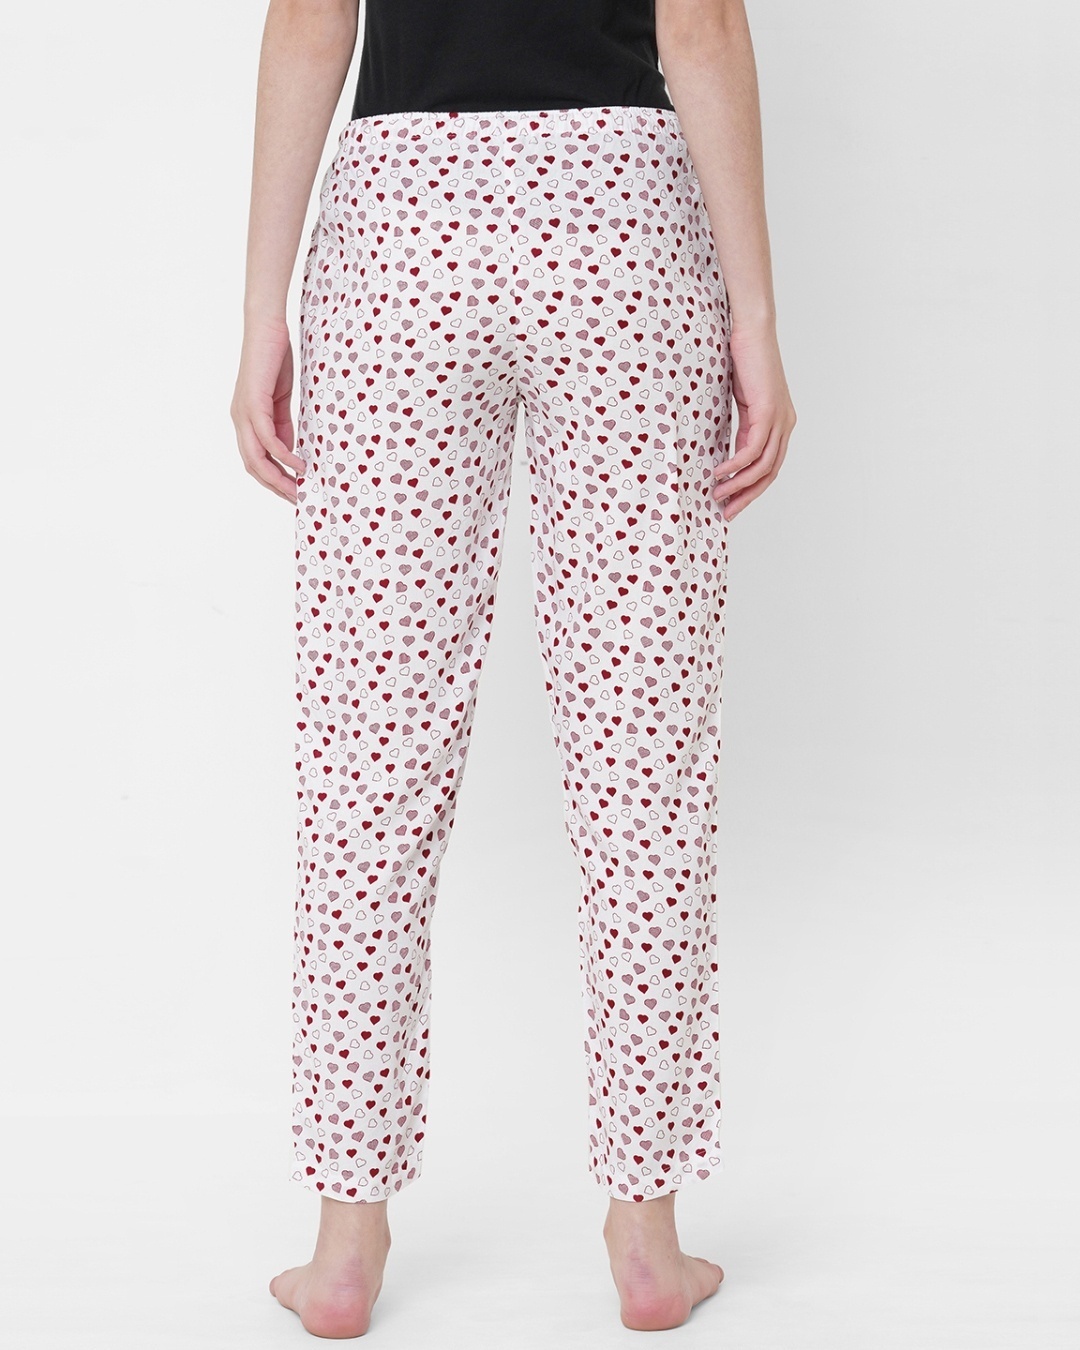 Shop Women's White All Over Heart Printed Lounge Pants-Design